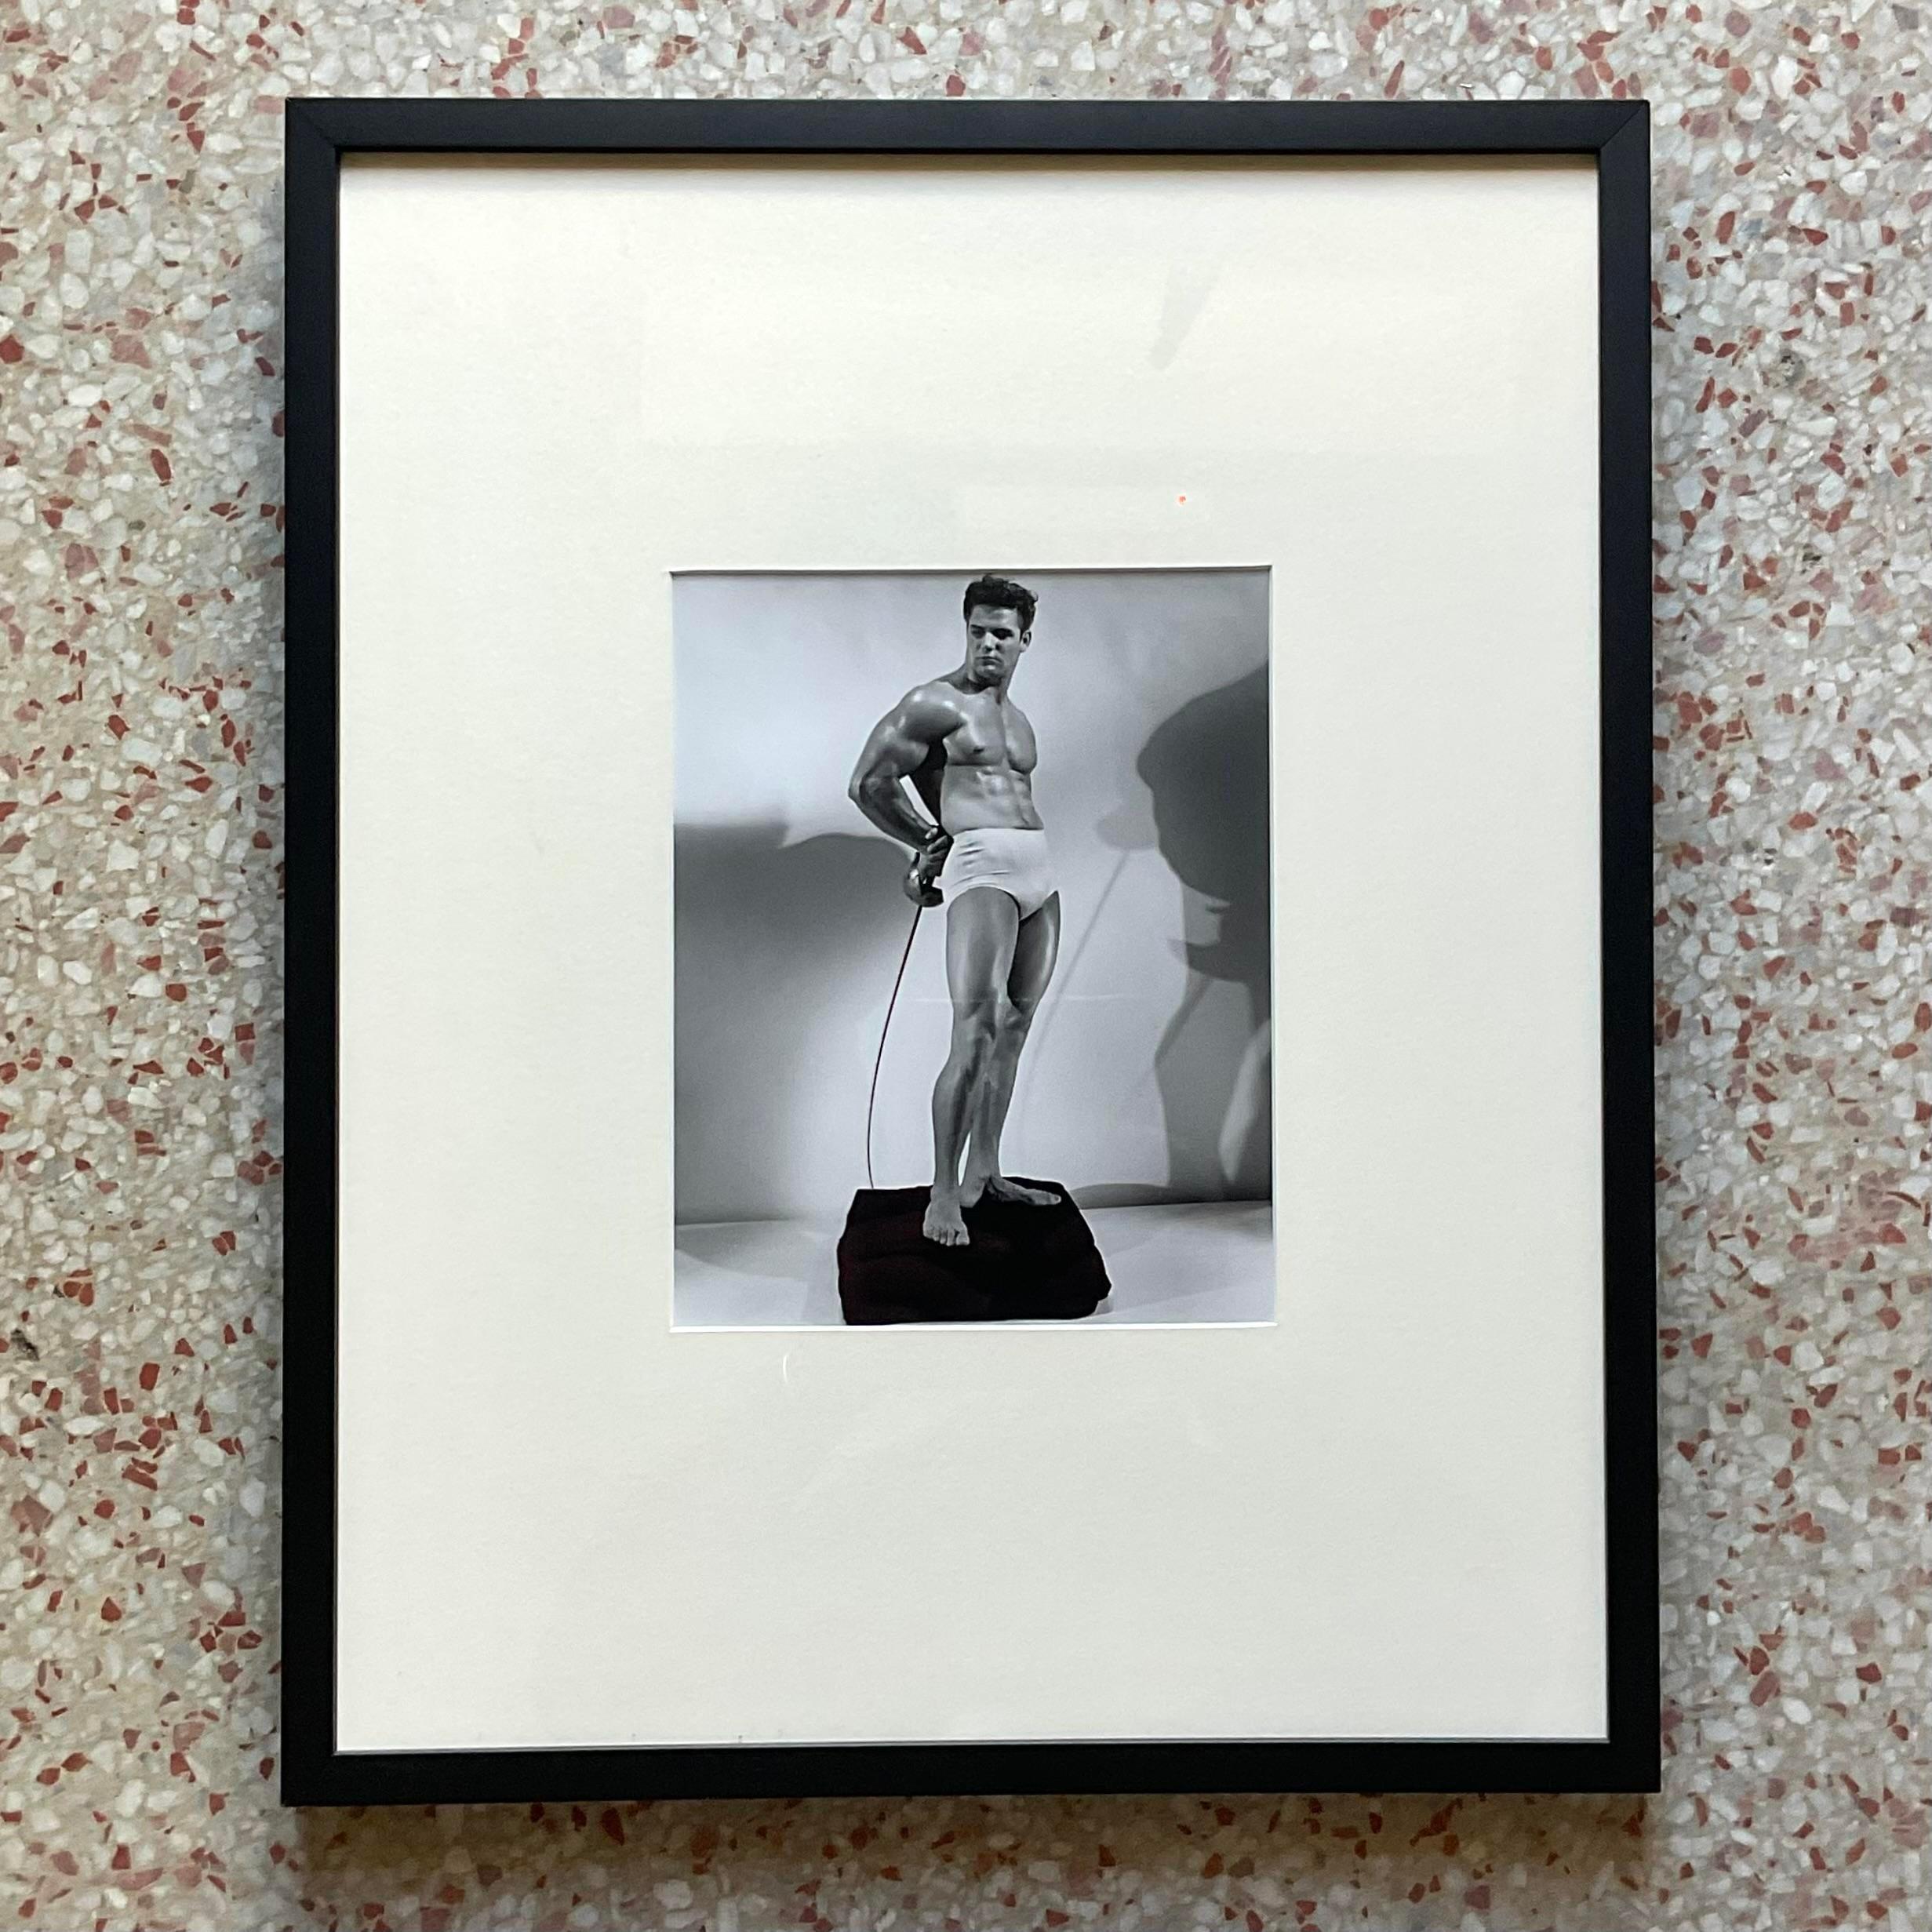 Glass Mid 20th Century Vintage Boho Bruce of La Photograph of Man With Fencing Sword For Sale